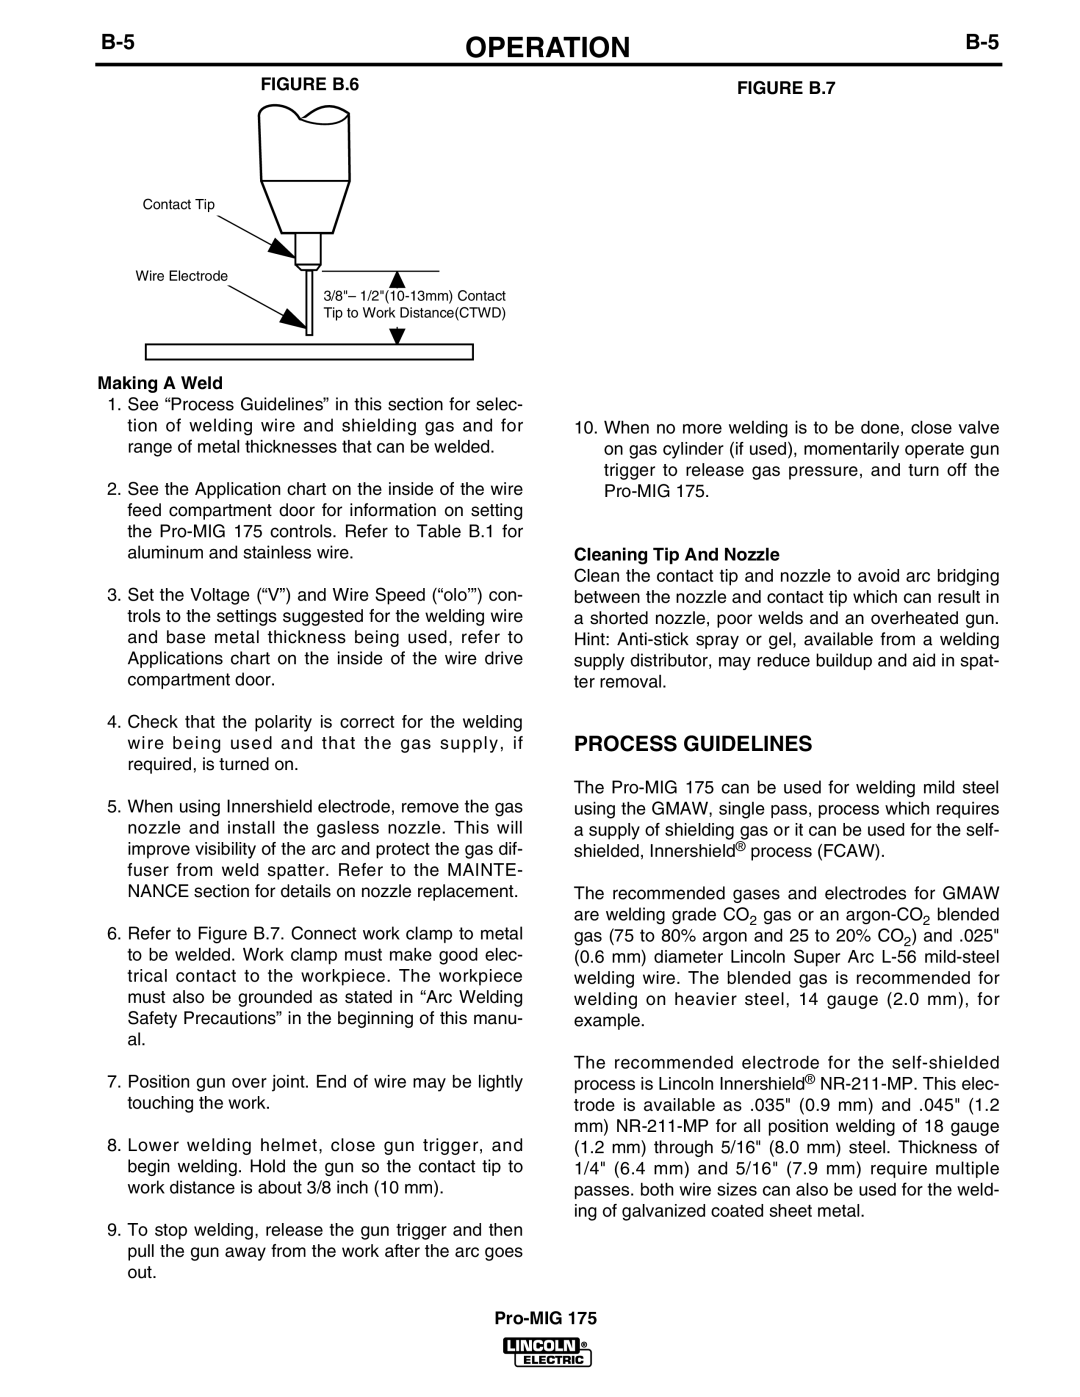 Lincoln Electric IM810 manual Process Guidelines, Making a Weld, Cleaning Tip And Nozzle 